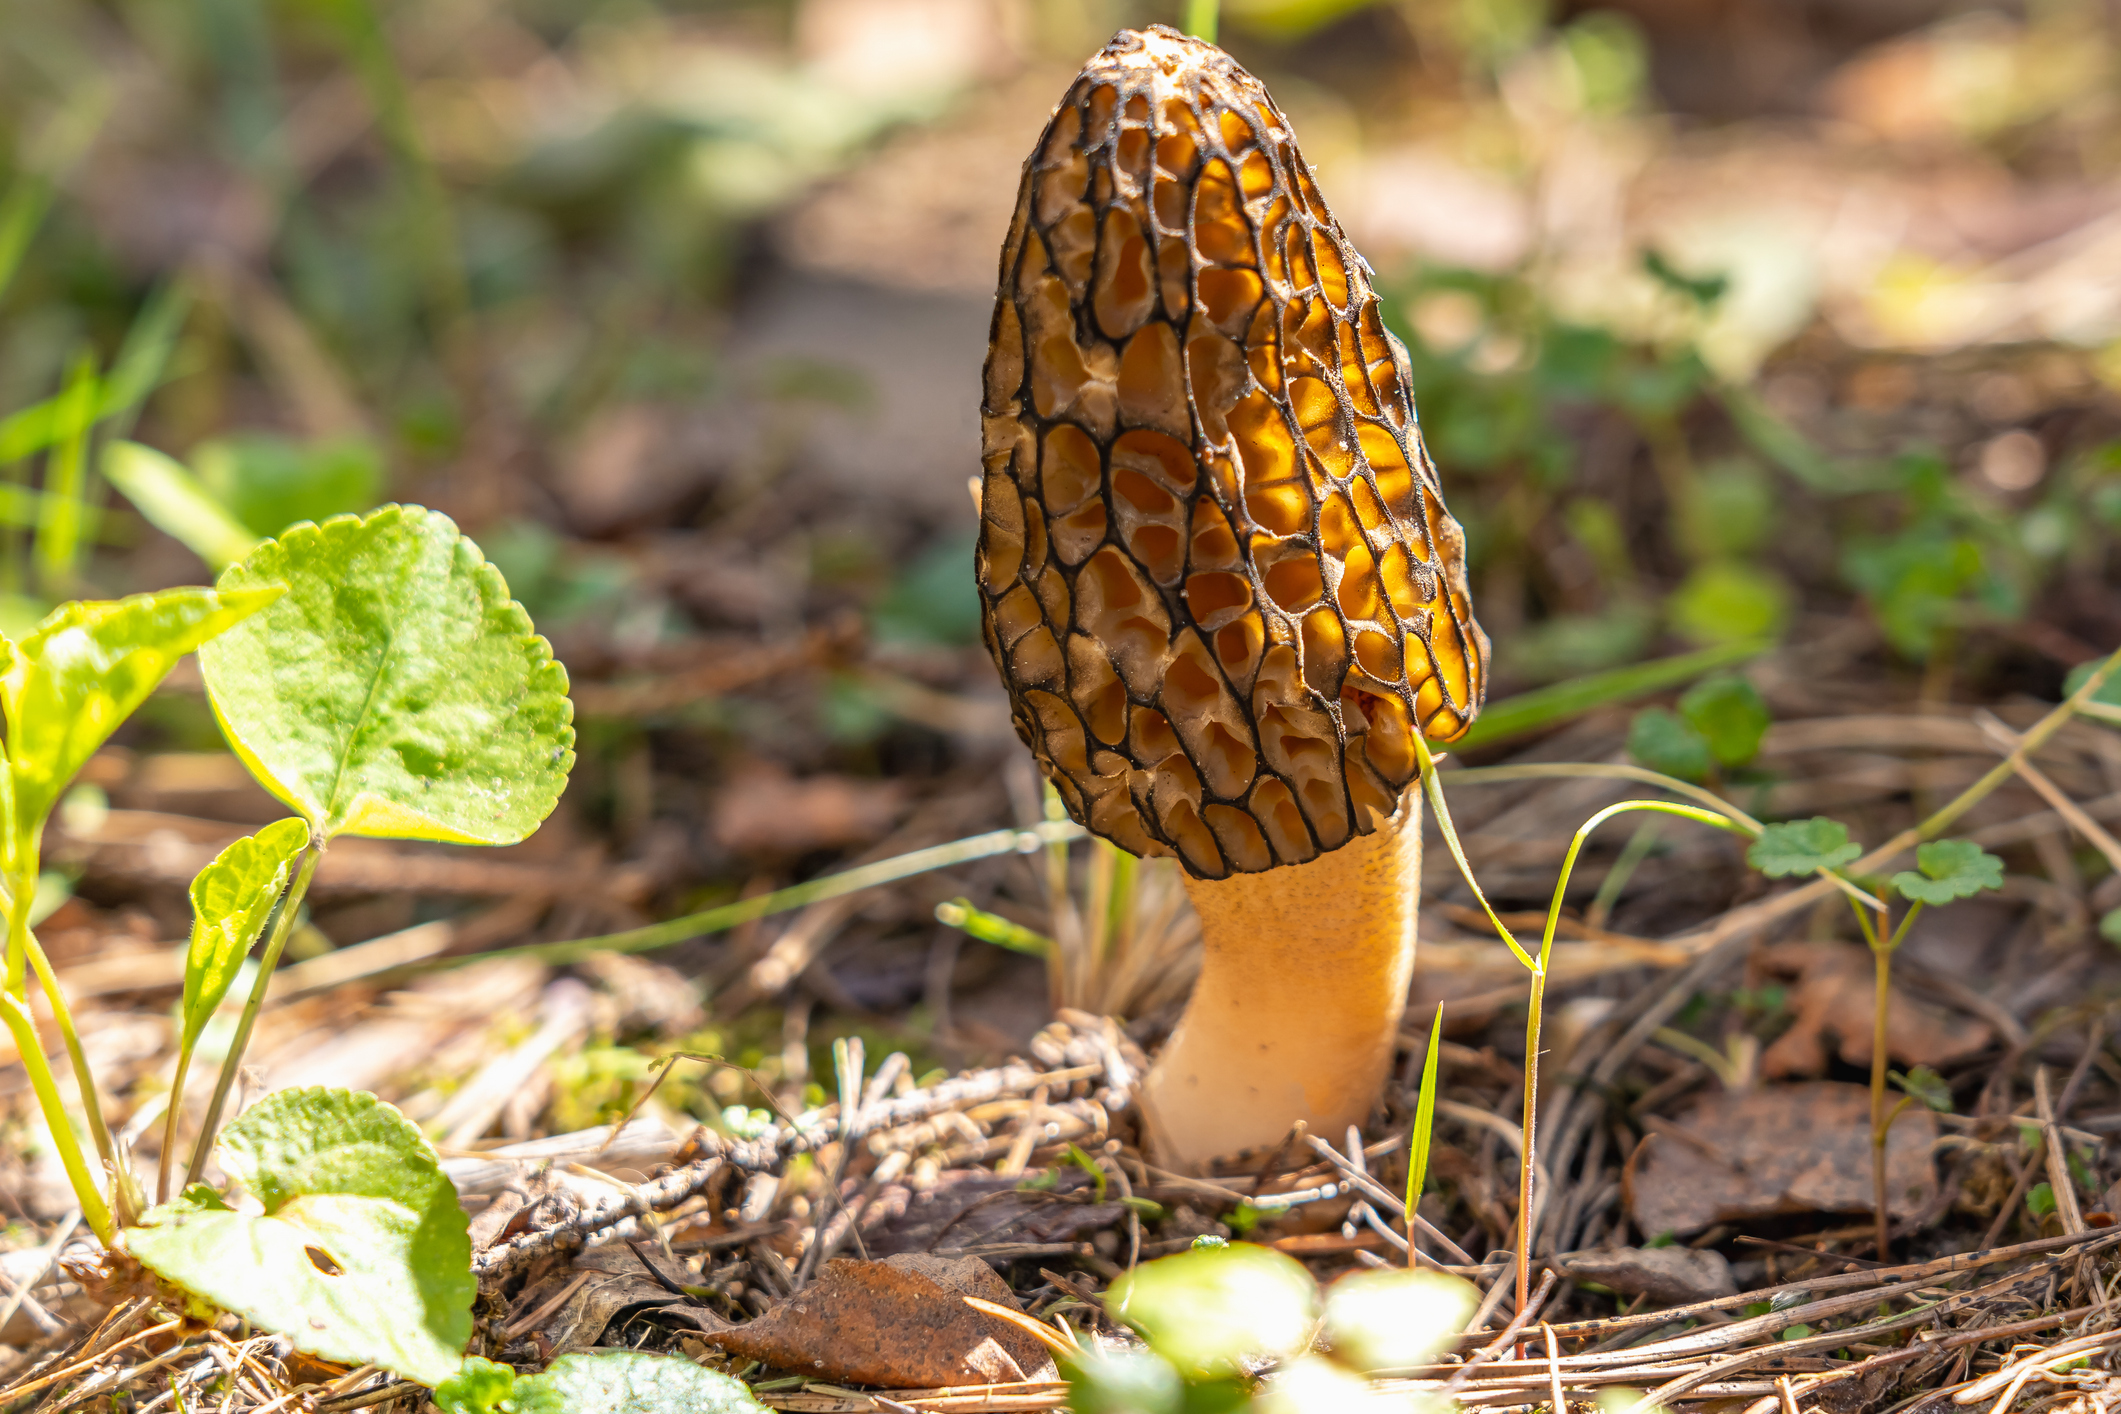 Morel Mushrooms found in wooded area. Morels are type of spring wild mushroom with meaty texture with nutty flavor. (Photo: iStock - Sergey-AND-Marina)